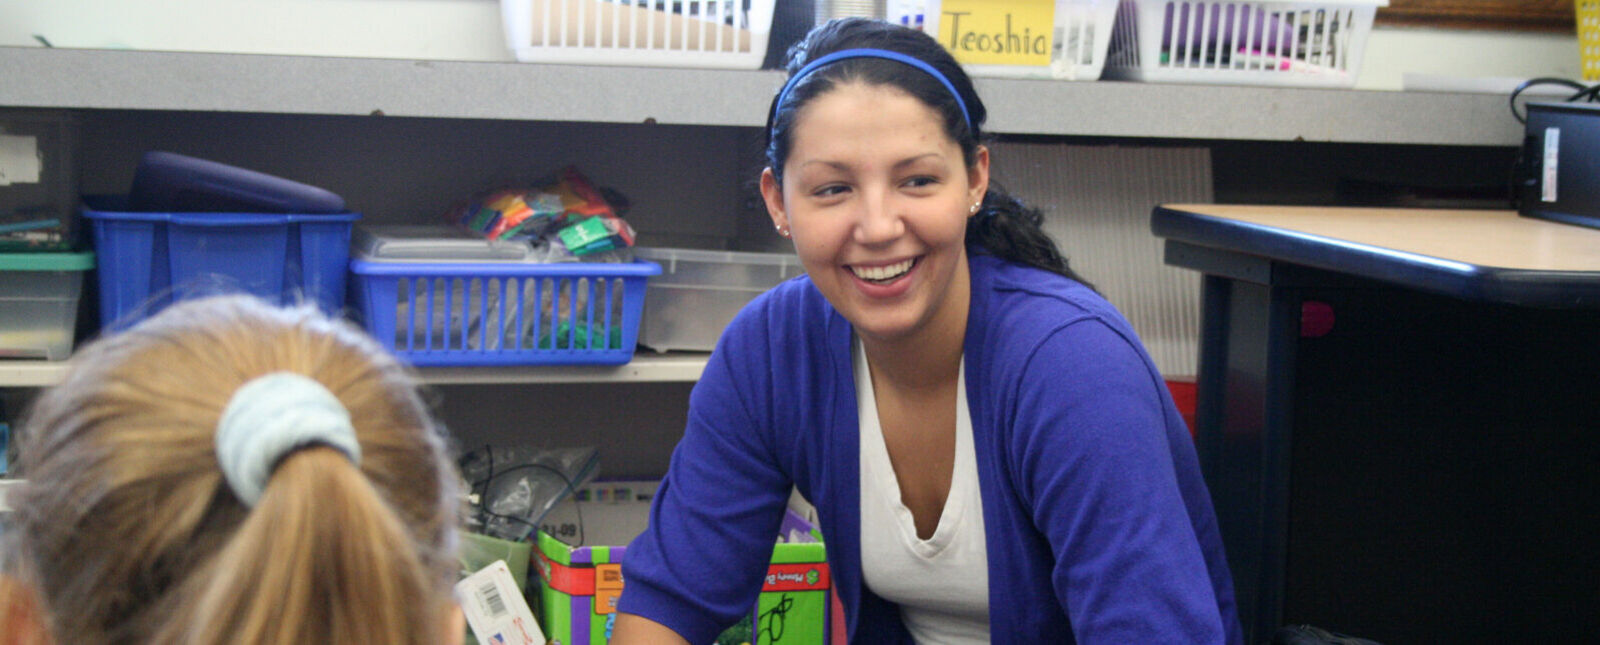 A female student teacher smiles while working in a classroom with a student